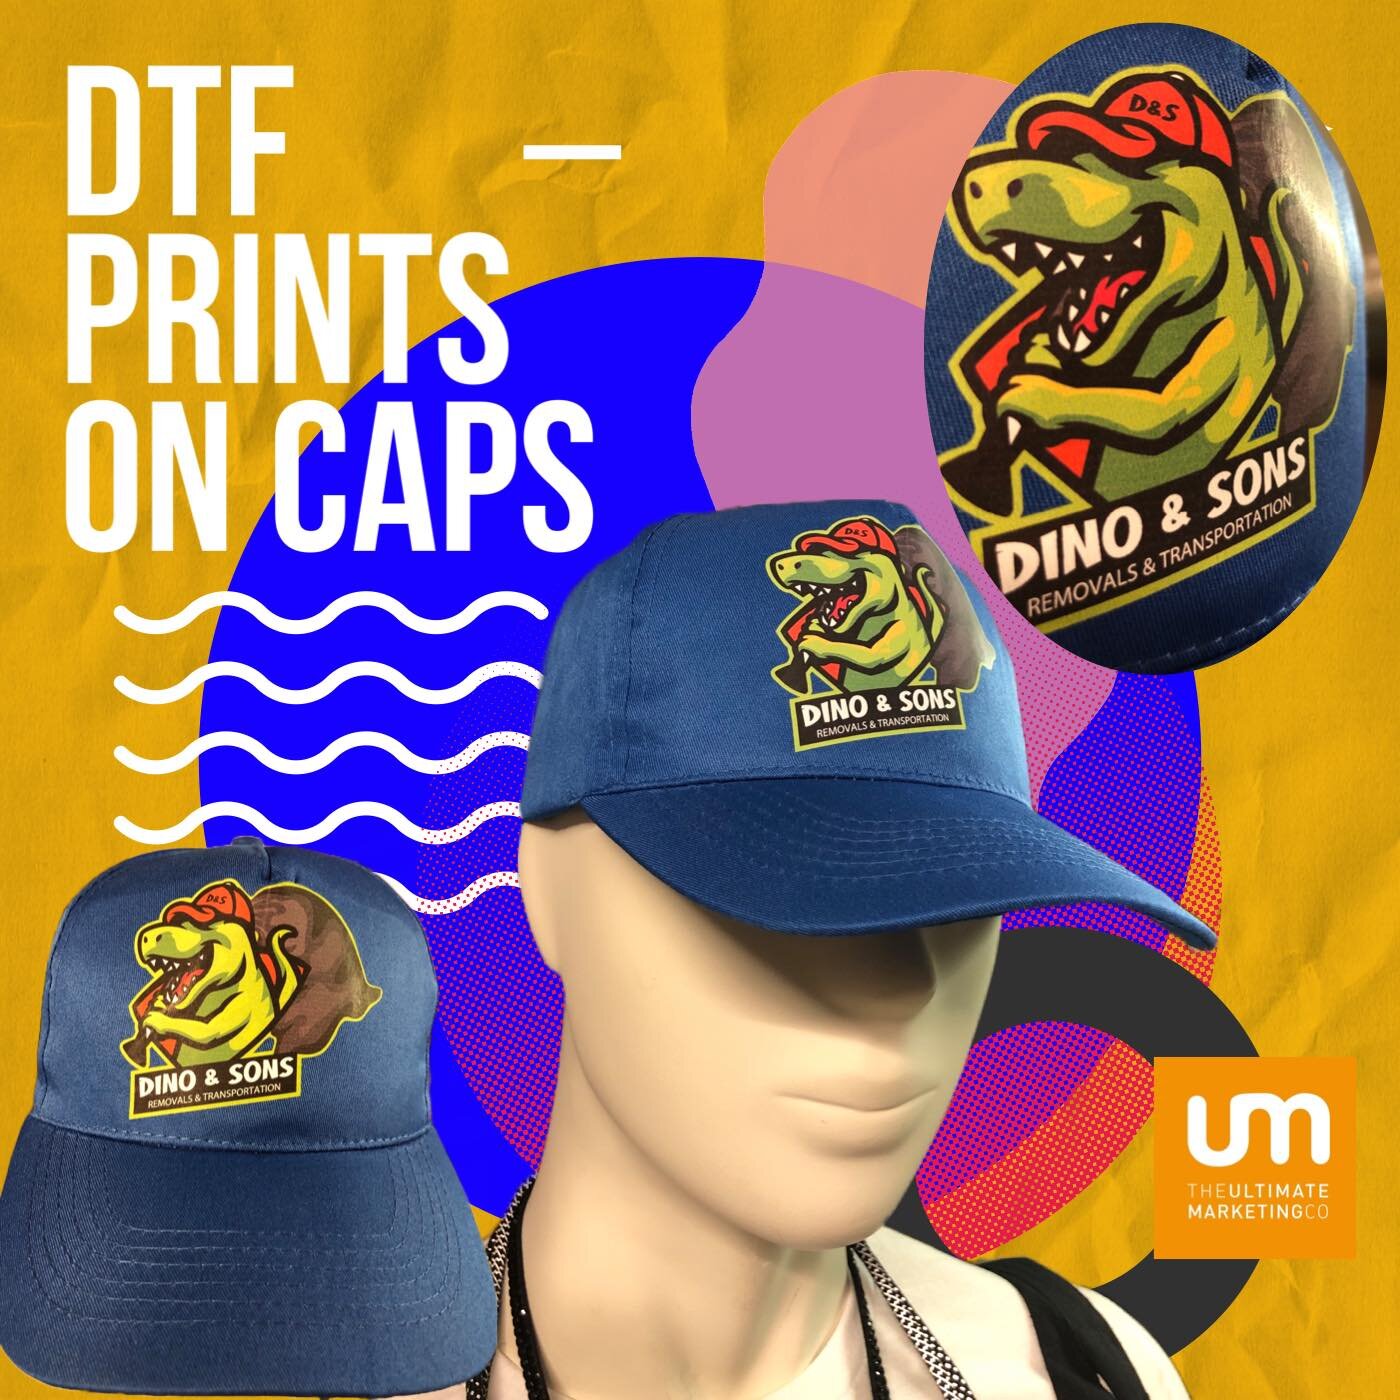 Transfers can not only be used on clothing but on products like caps, notebooks, bottles, hats and much more!! 

#dtftransfers #dtfprinting #personalisedclothing #brandedproducts #vibrantcolors #printingcompany